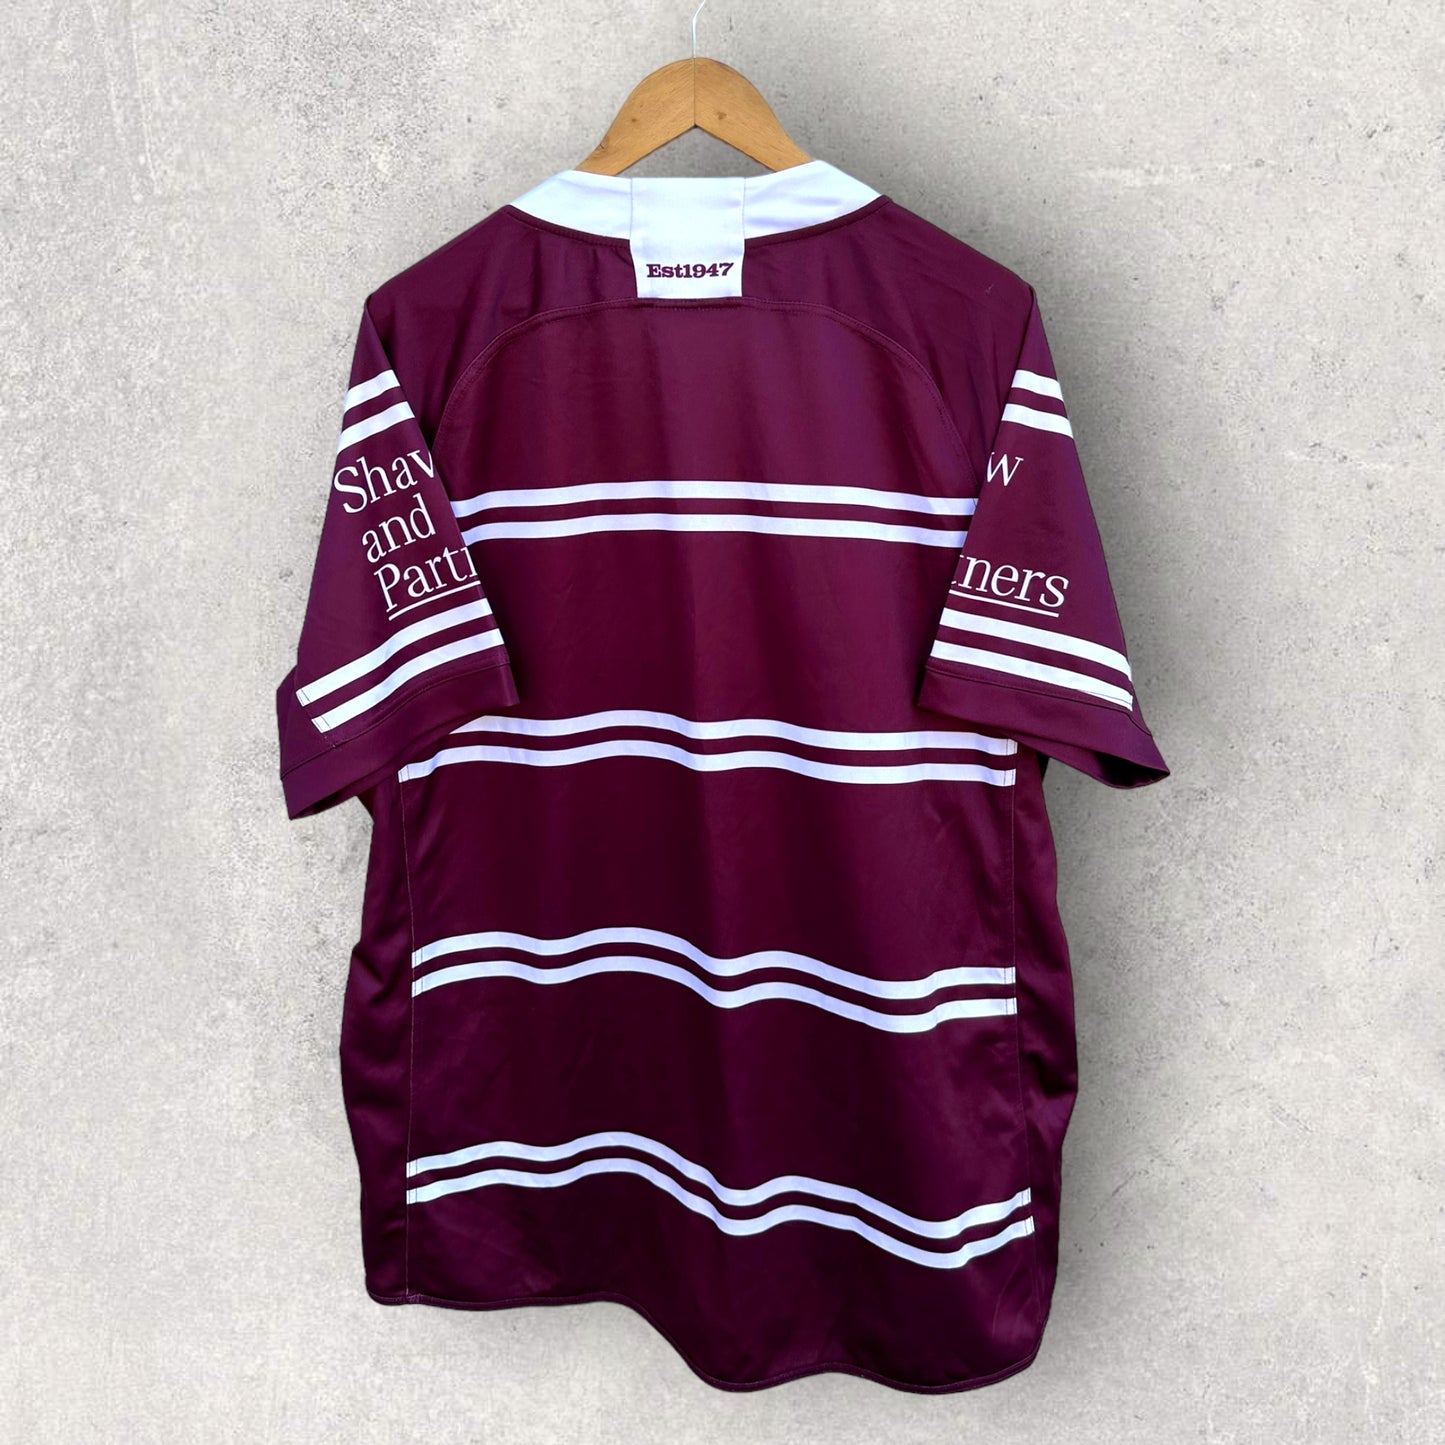 MANLY SEA EAGLES 2019 HOME JERSEY